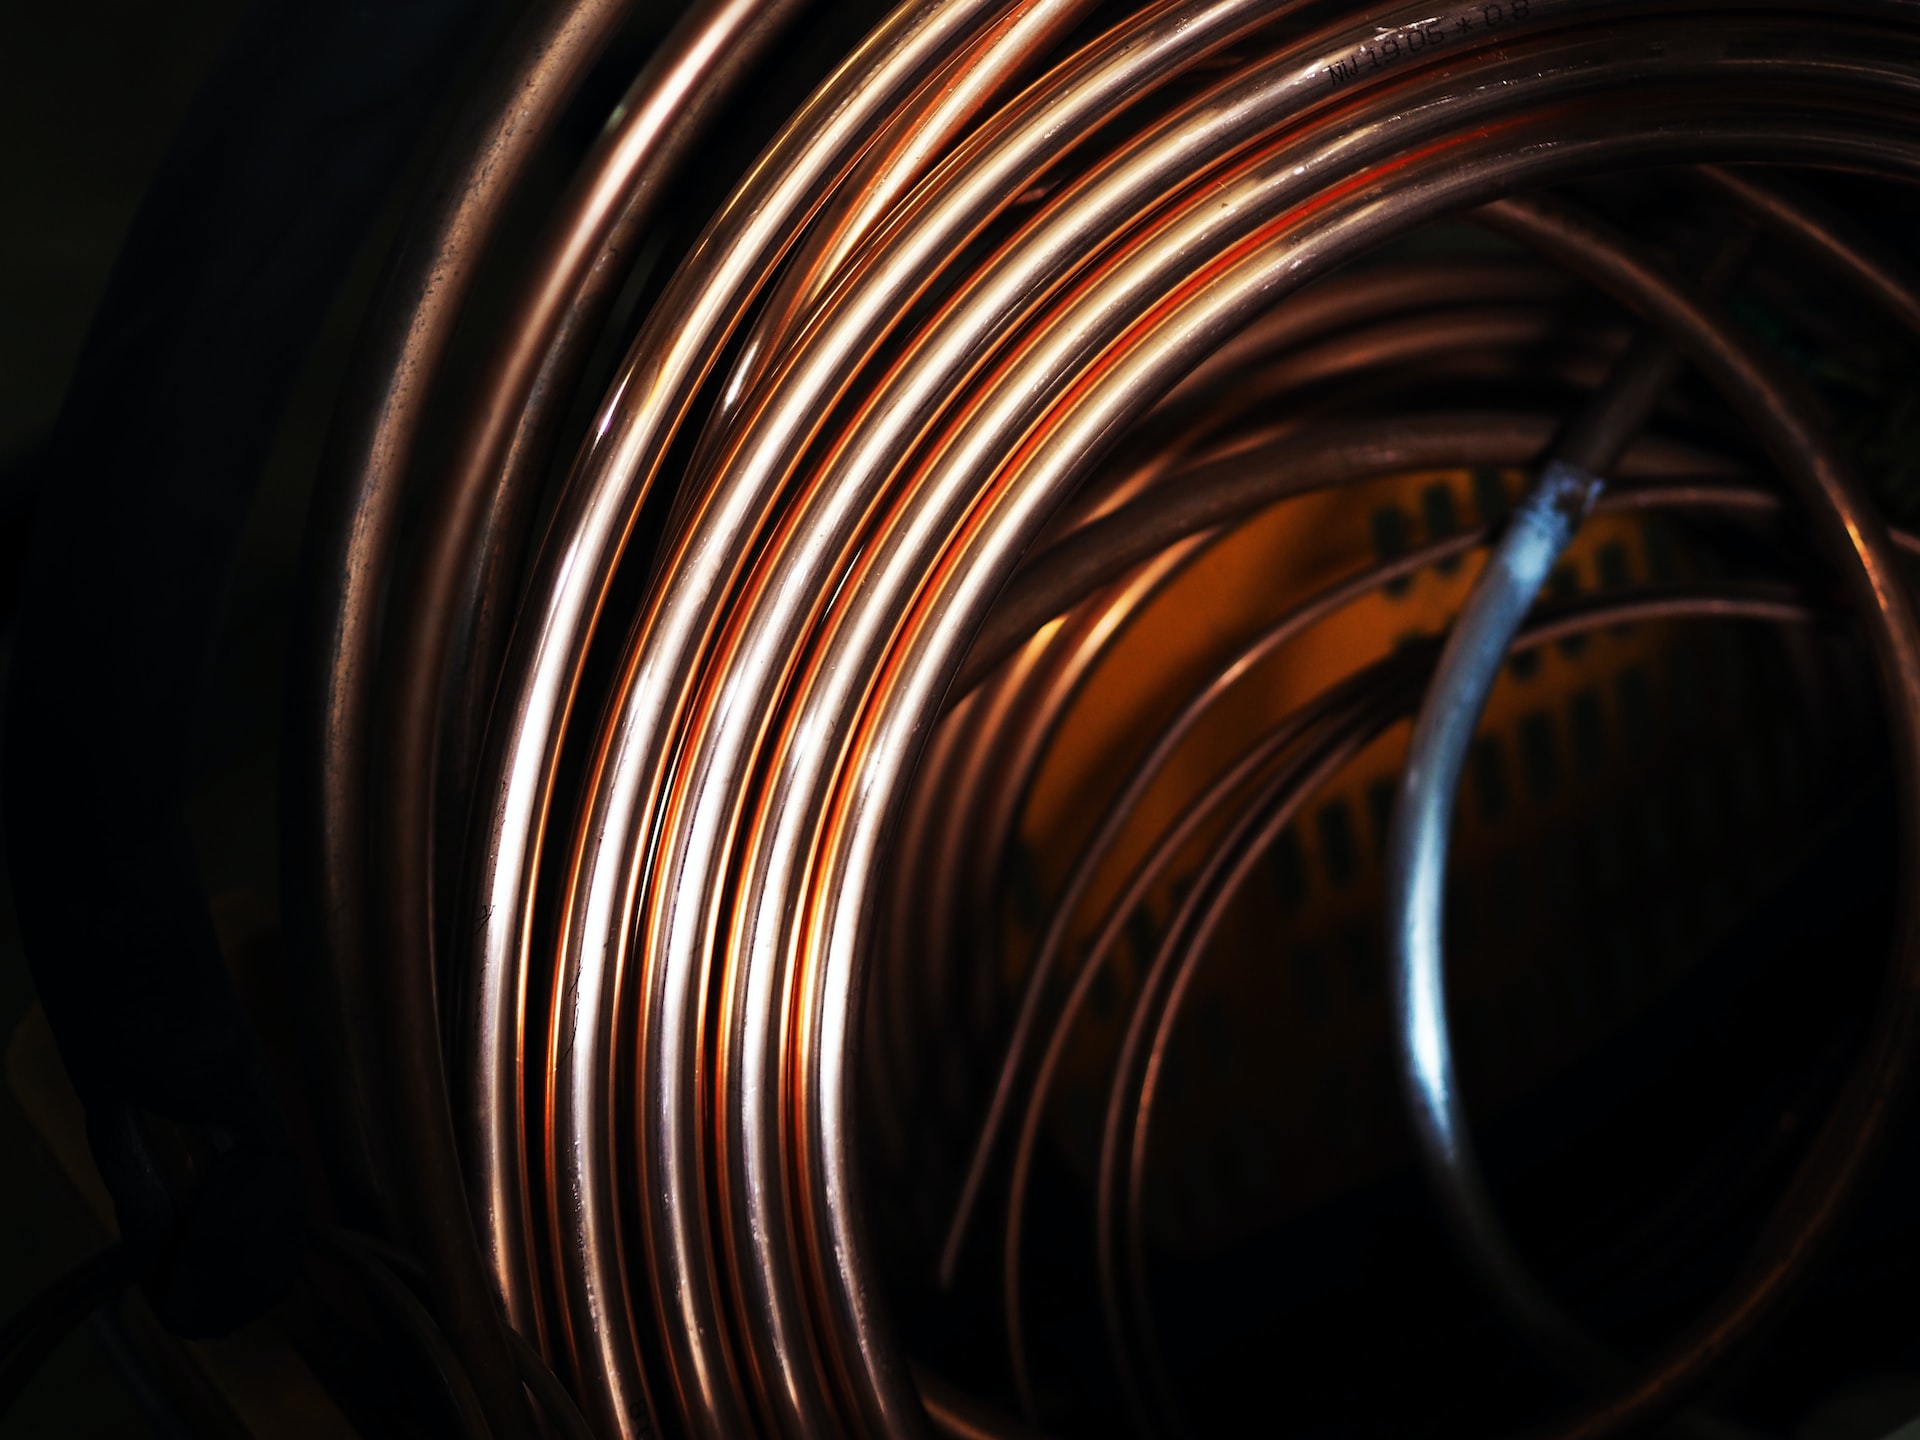 Chile Mining Sector - Australian Equities Research Trip. Image: Copper coils